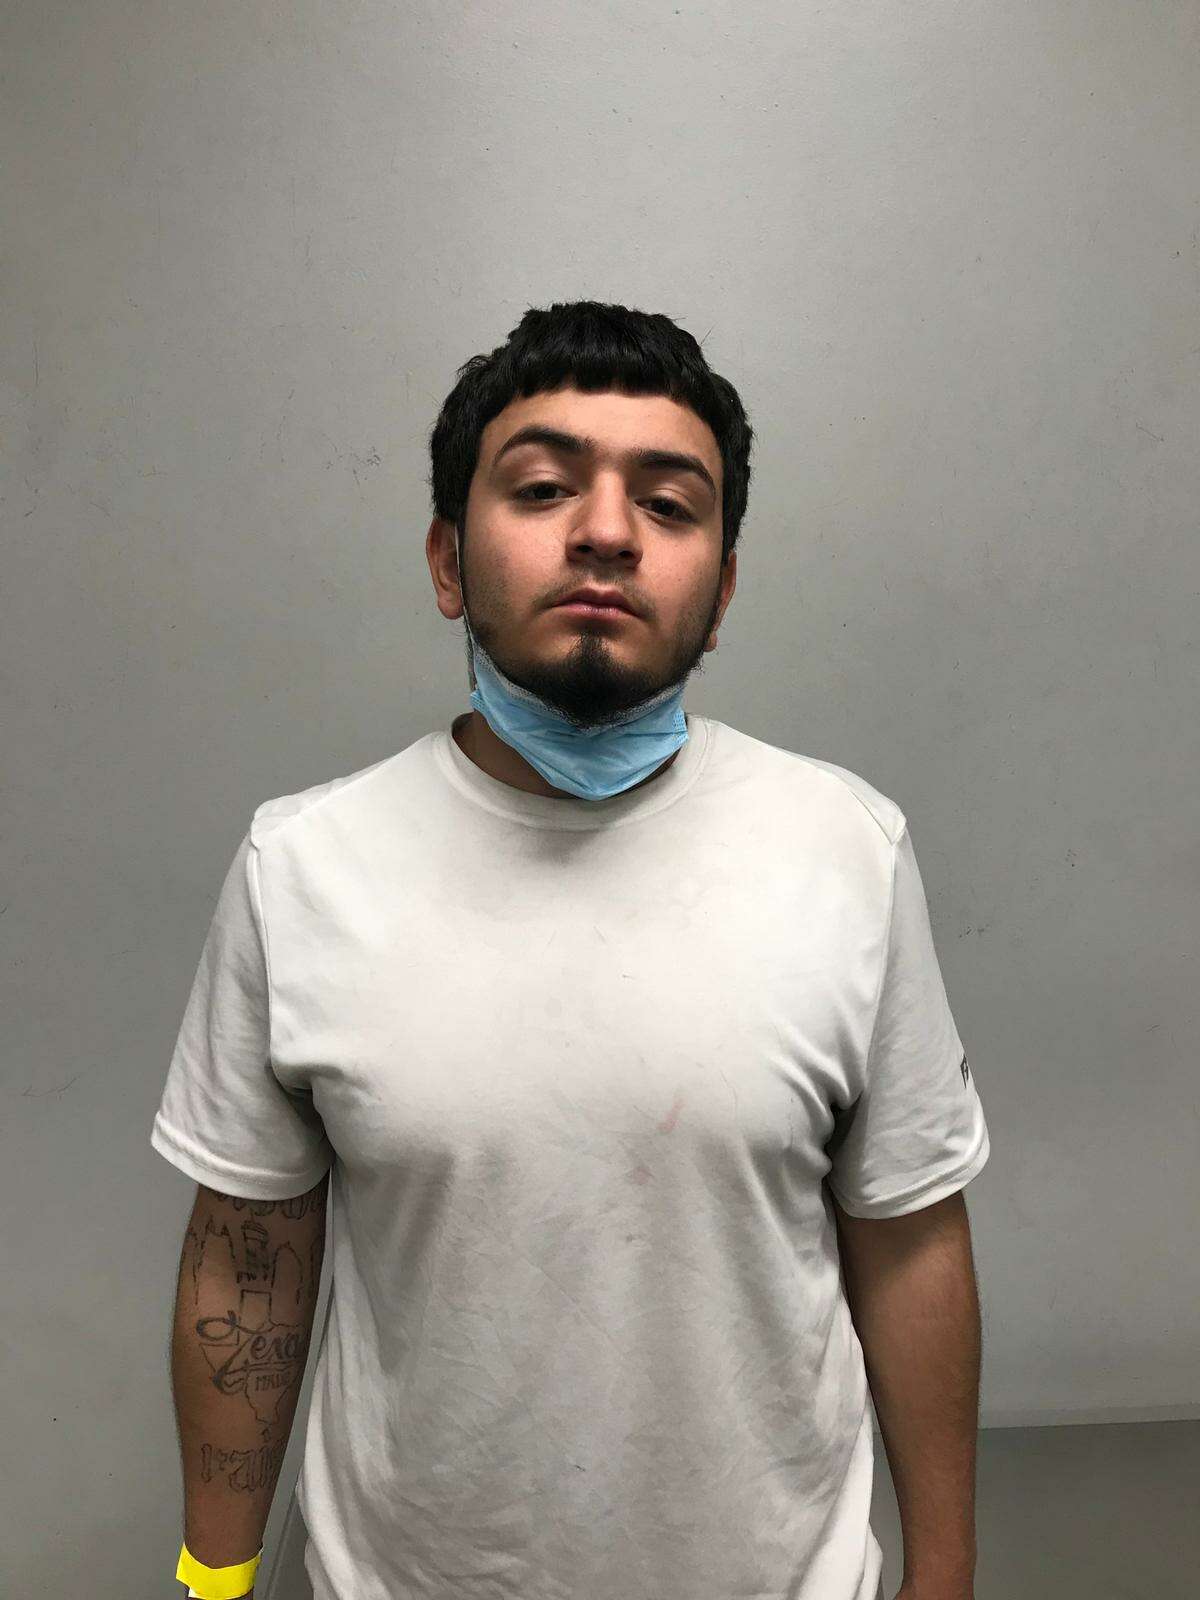 Angel Koenigstein, 19, faces a capital murder charge and two counts of aggravated assault with a deadly weapon, the Bexar County Sheriff’s Office said.